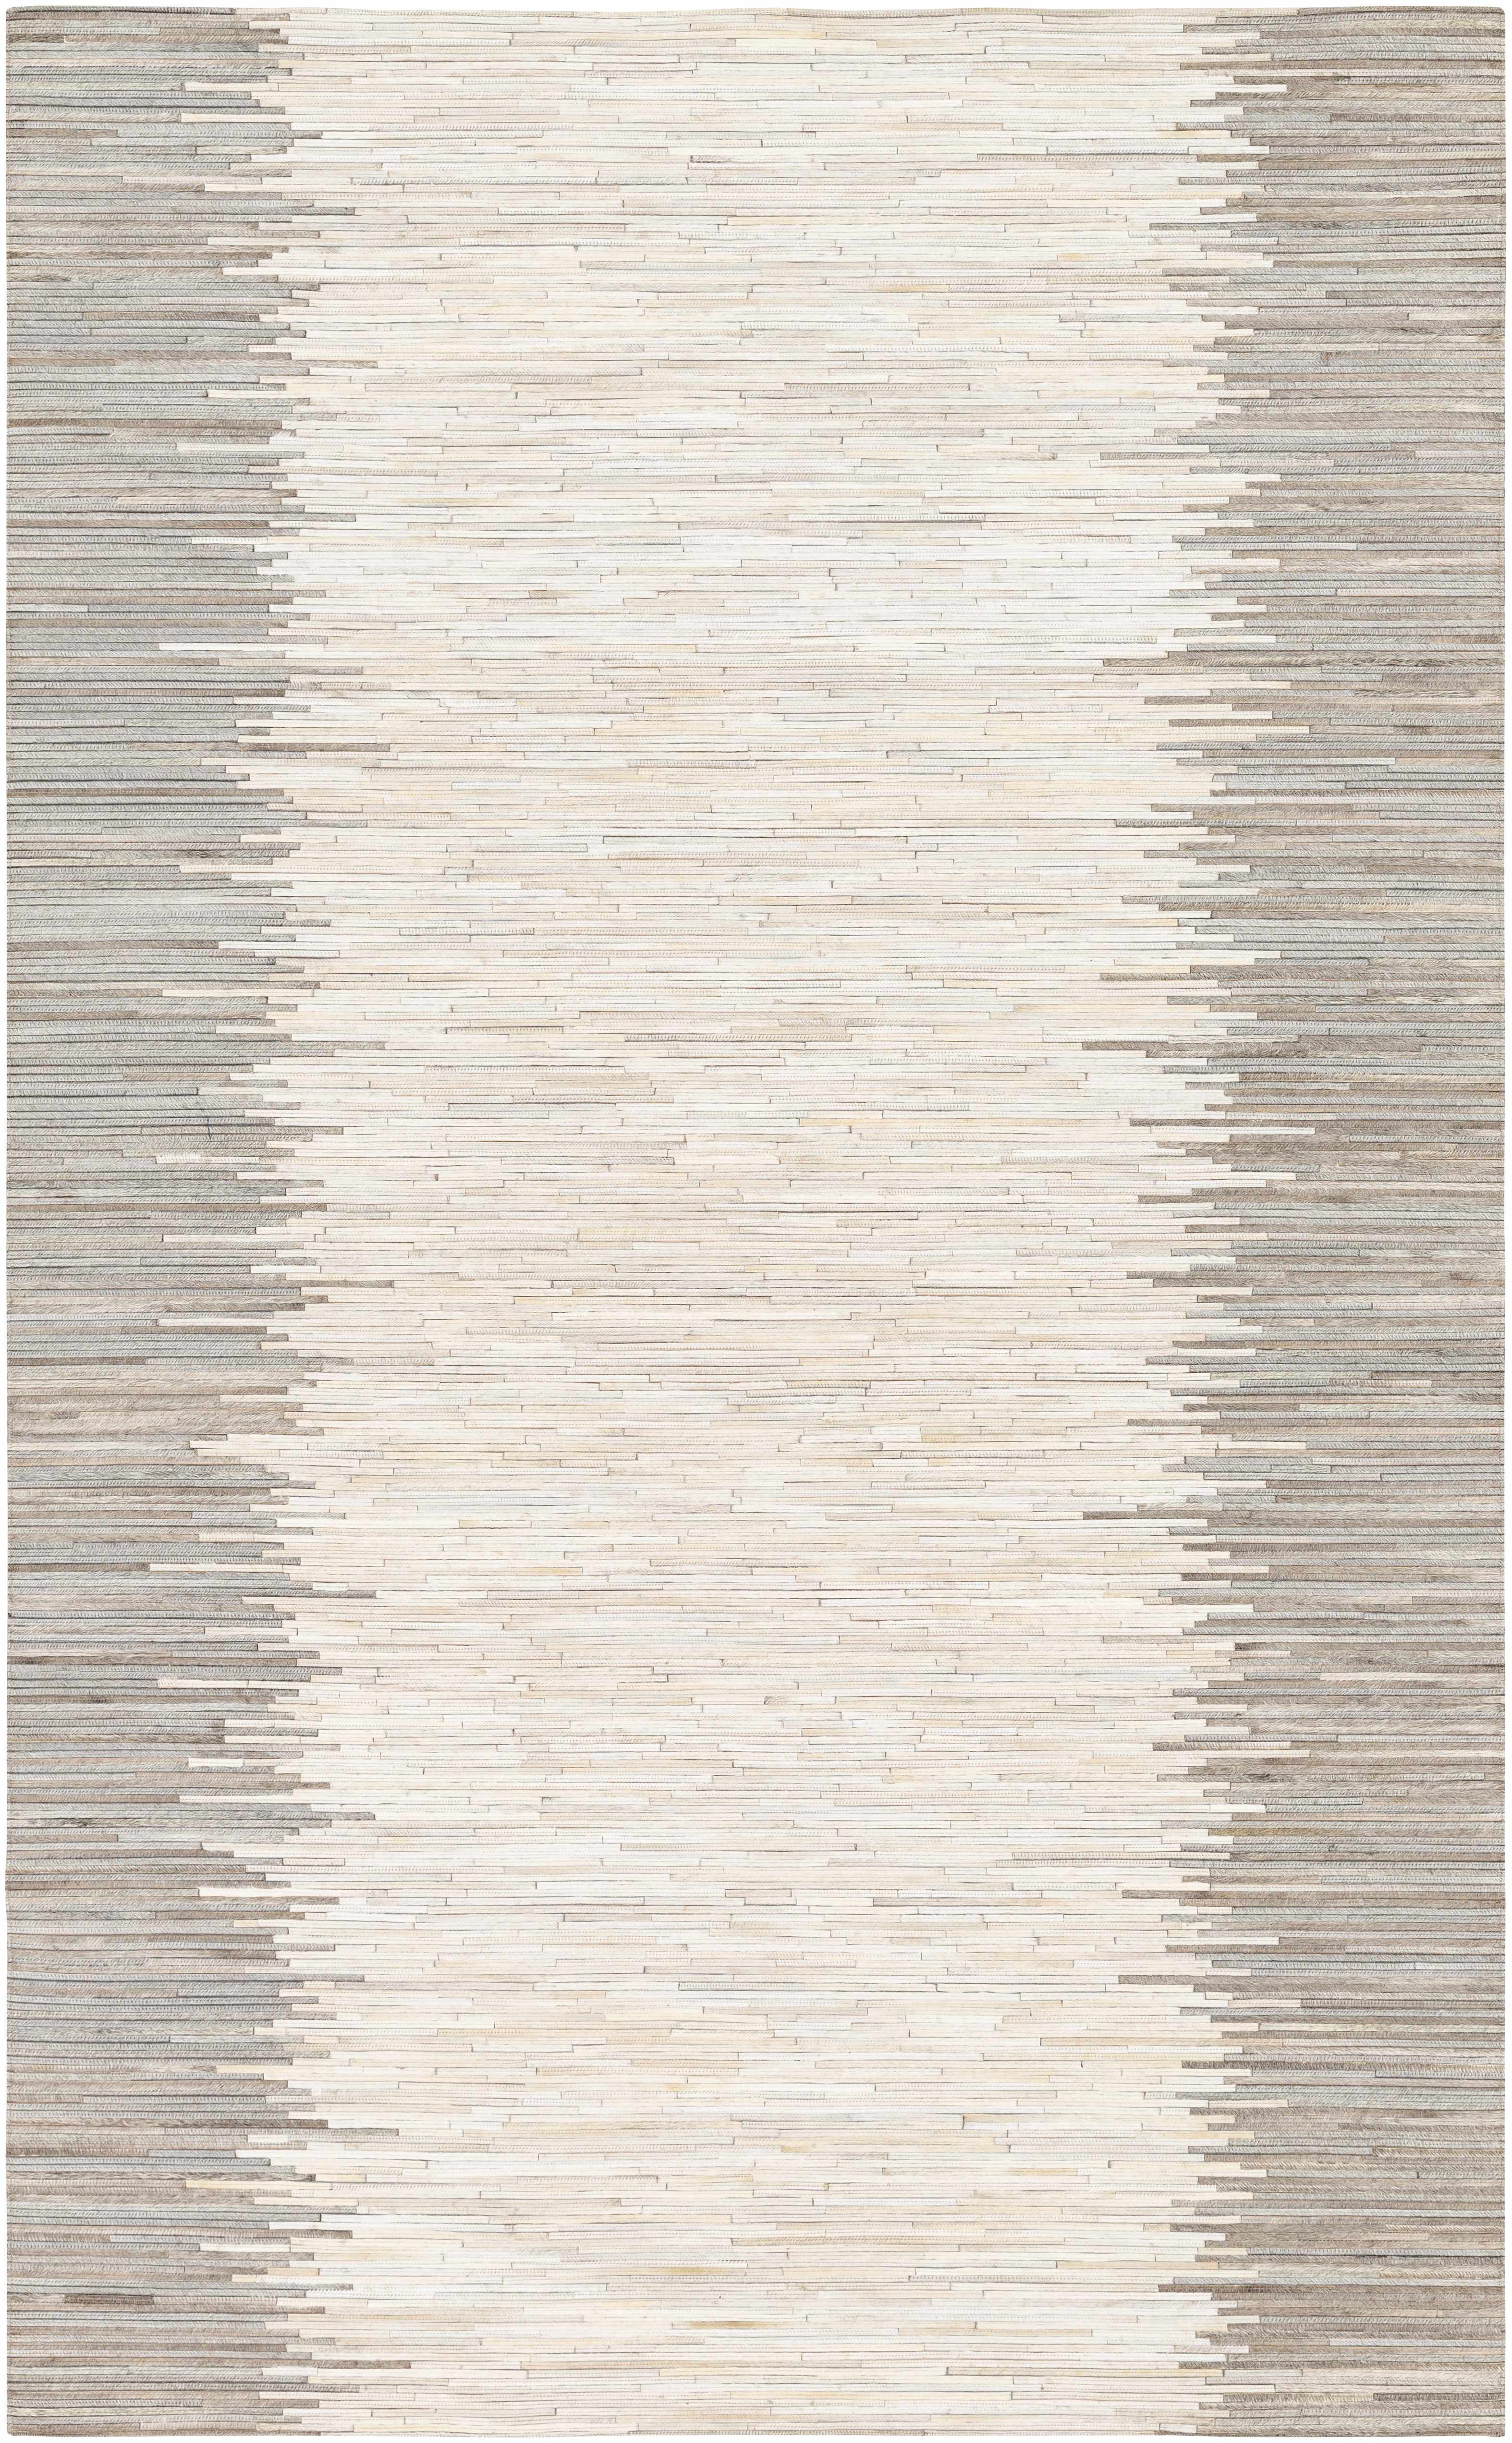 Suches 5' x 8' Hide, Leather & Fur Cowhide Leather Area Rug - Hauteloom